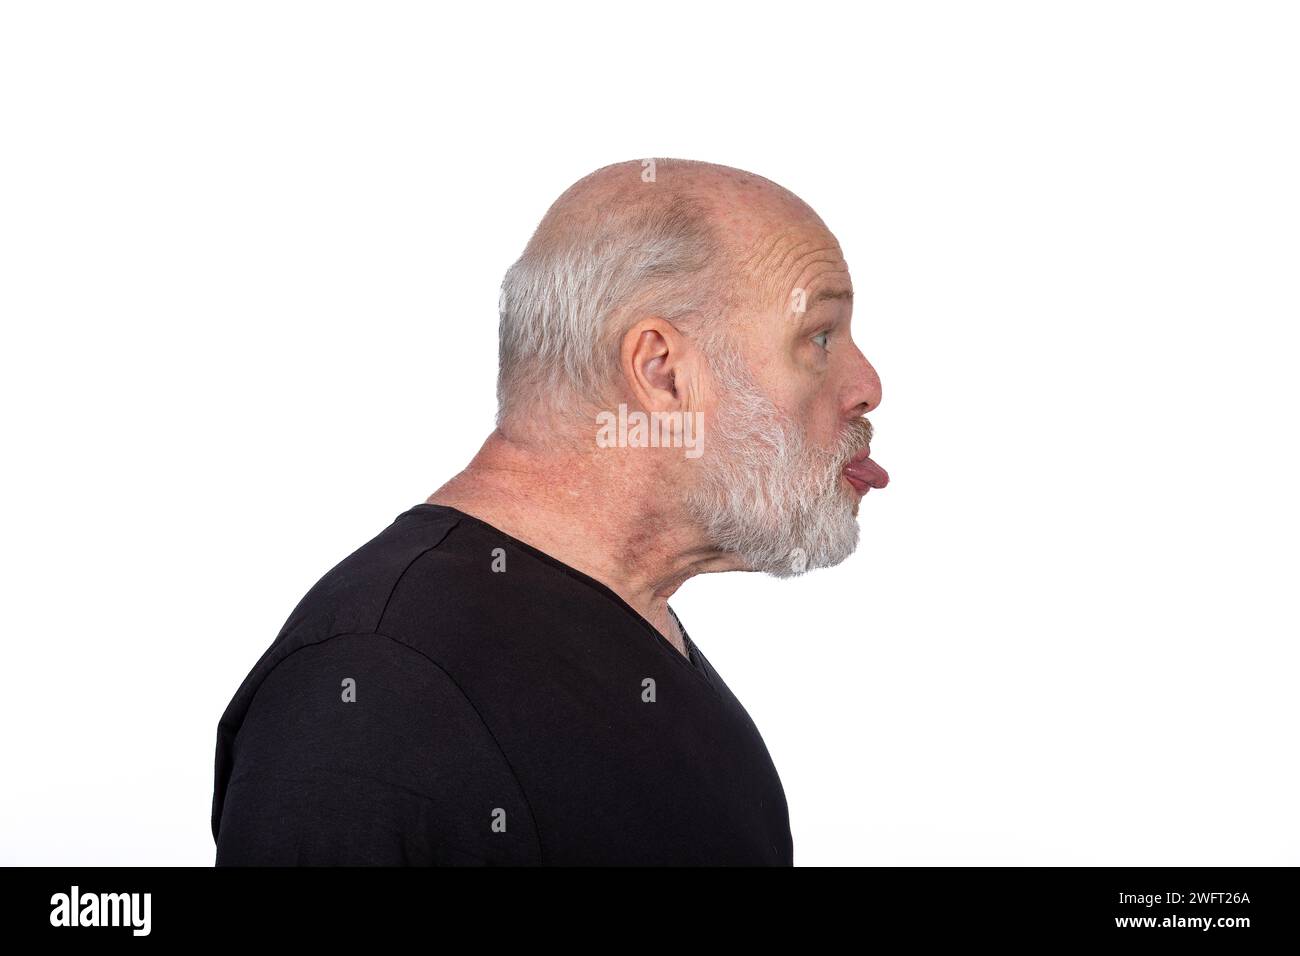 Profile Portrait, Middle-Aged Bearded Man in Black T-Shirt Sticking Out Tongue - Playful Humor on White Background Stock Photo